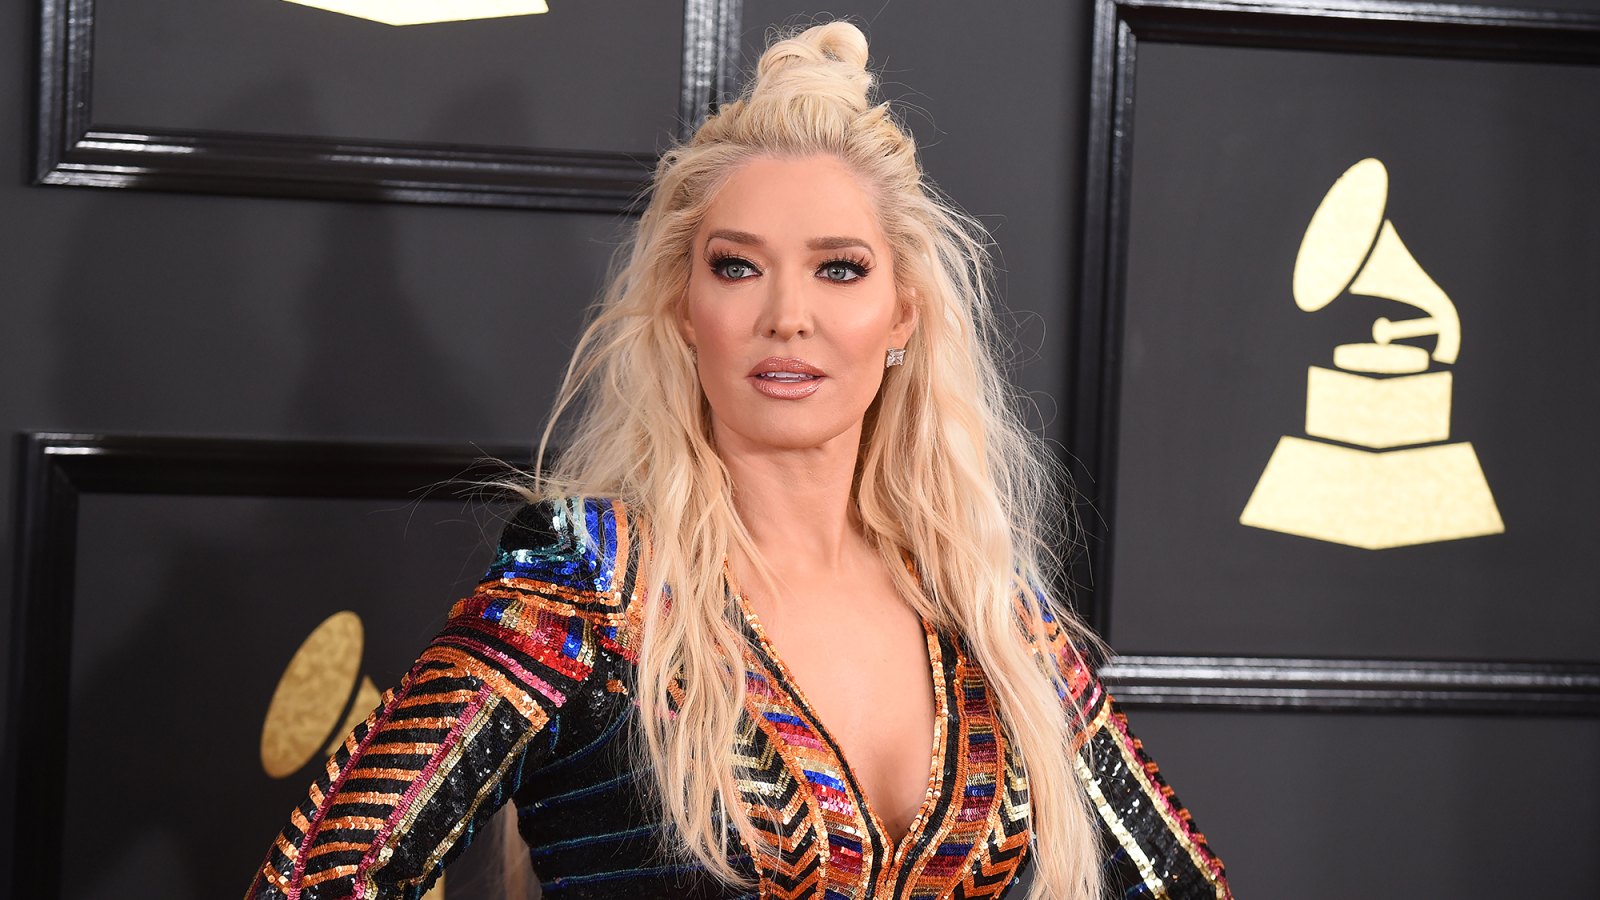 Erika Jayne Urges Followers to ‘Stop Threatening My Life’ Amid Ongoing Legal Woes